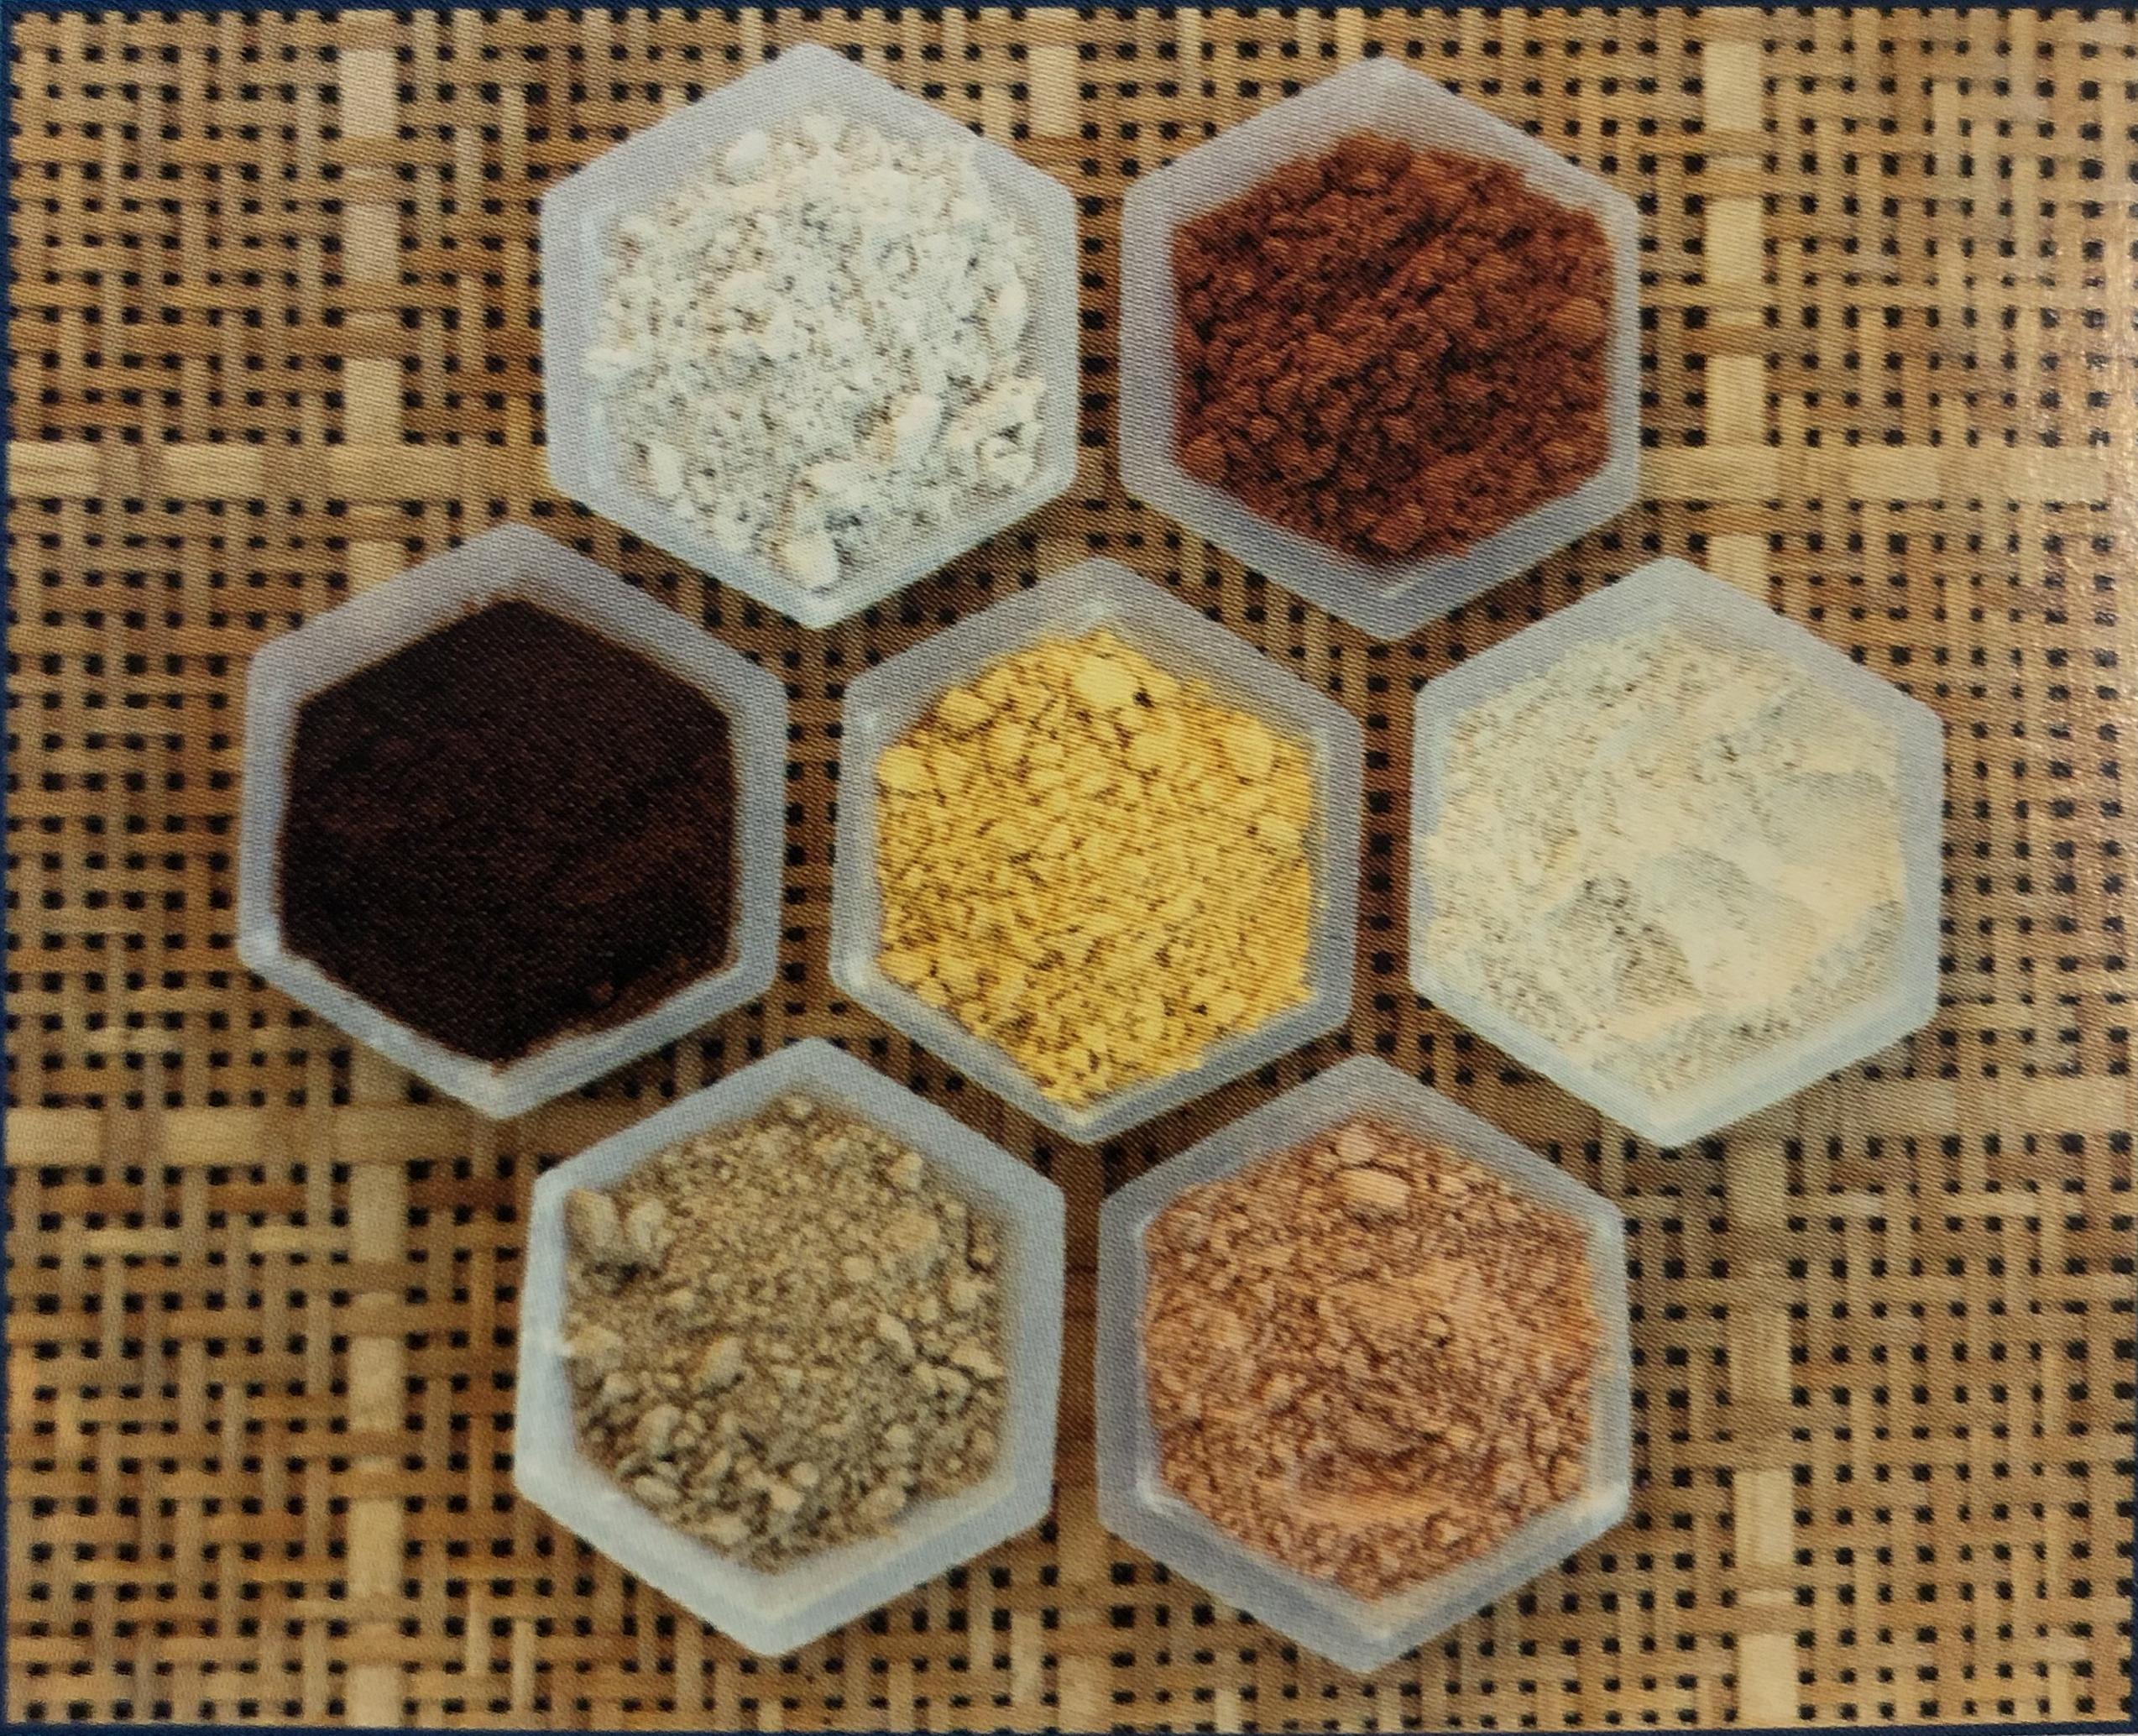 assorted fish feeds - clockwise from top right: liver meal, soybean mea, krill meal, de-boned whitefish meal, squid meal, wheat gluten meal; center; corn fluent meal